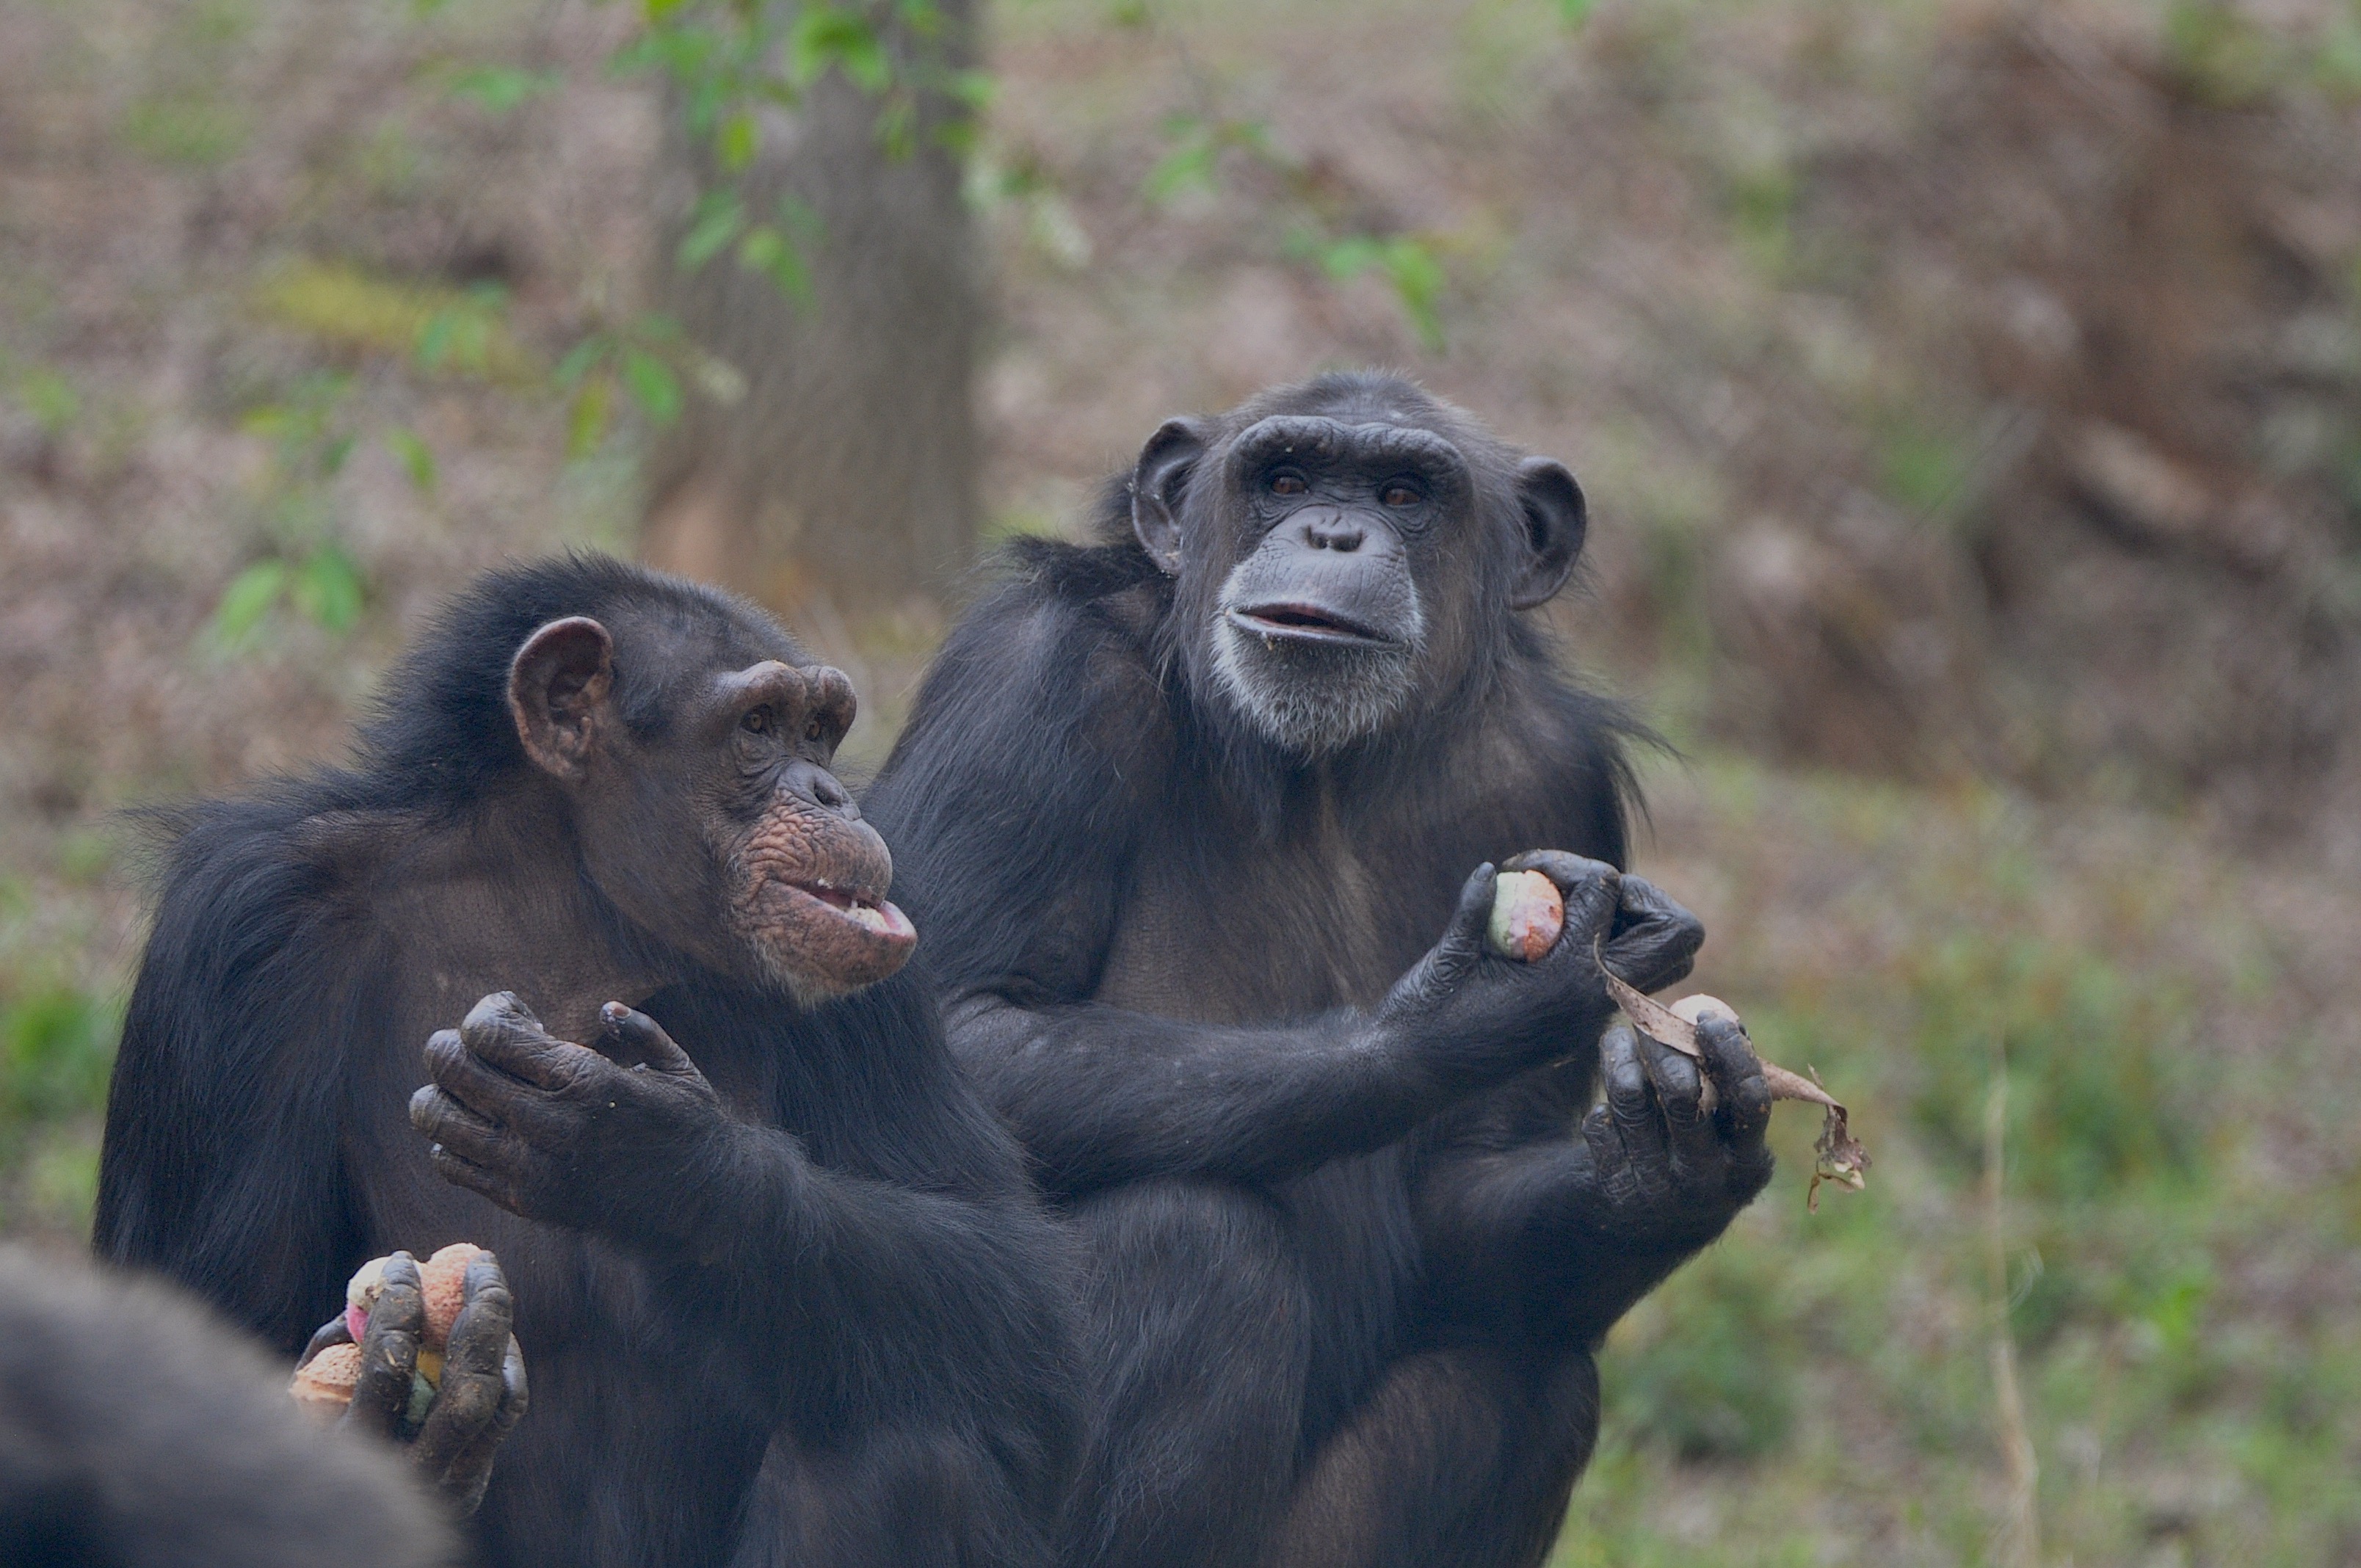 gertrude and latricia chimpanzee eating together